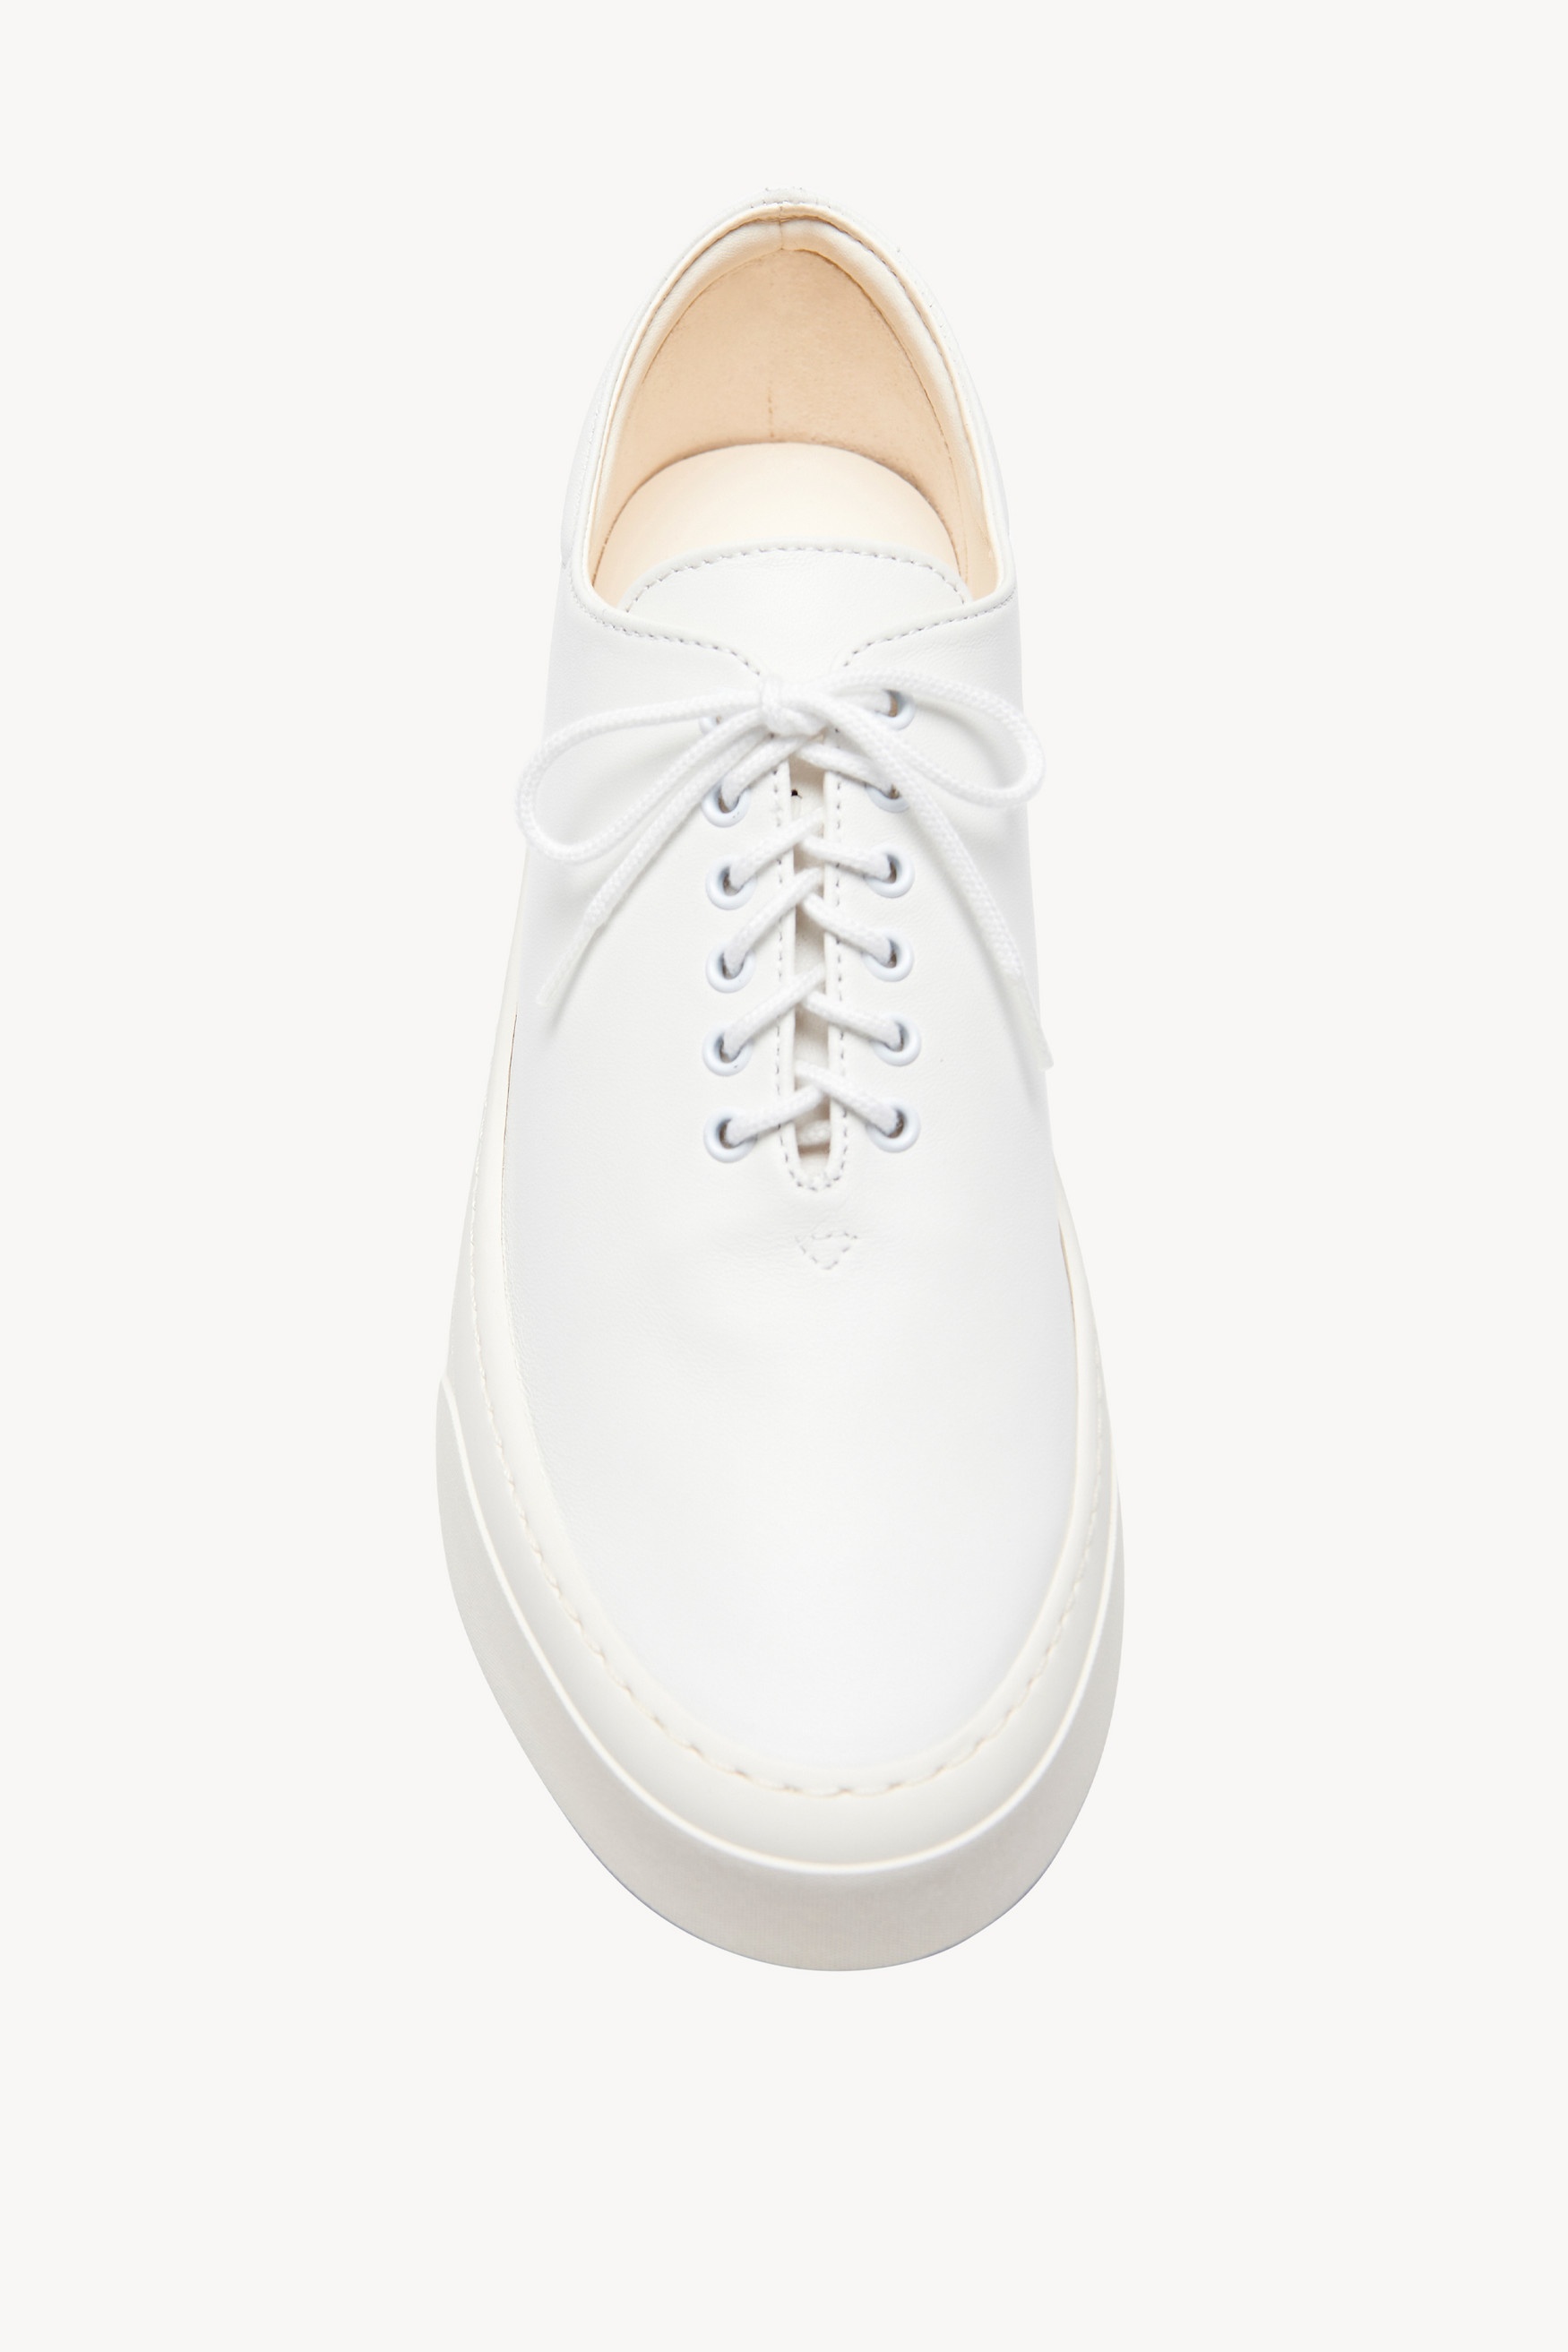 Marie H Lace-Up Sneaker in Leather - 3